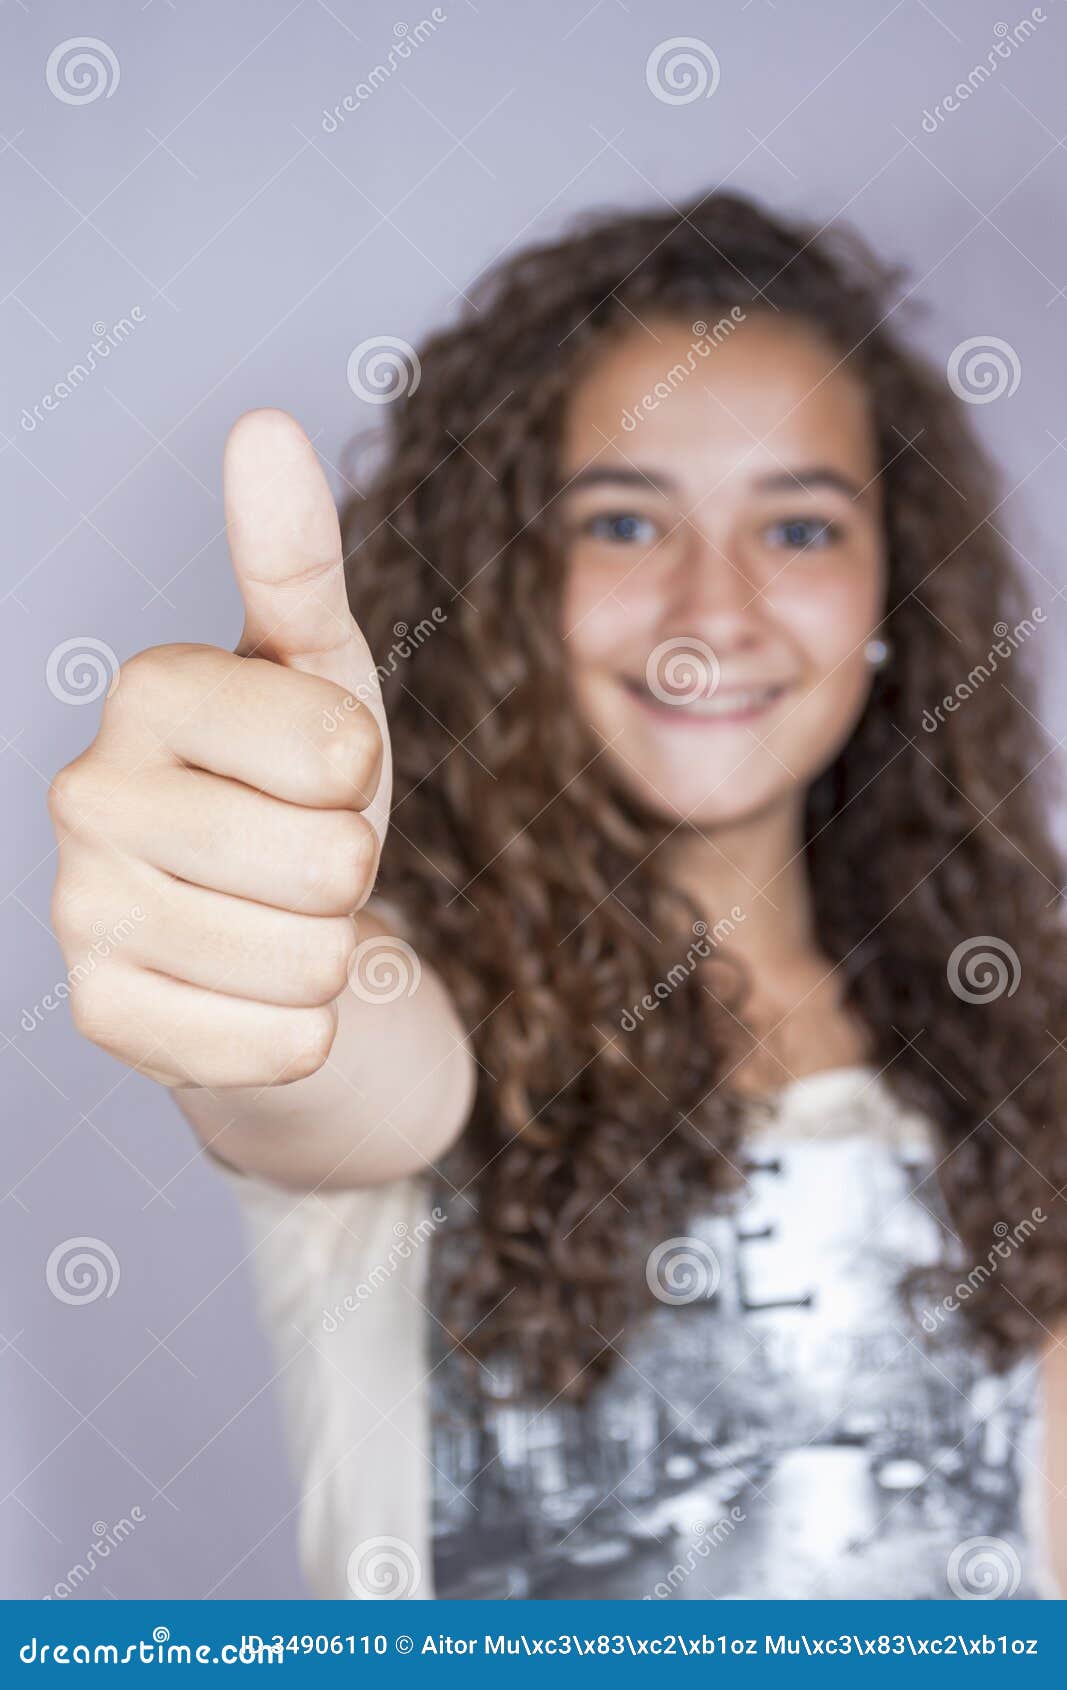 girl with thumbs up, happy and successful